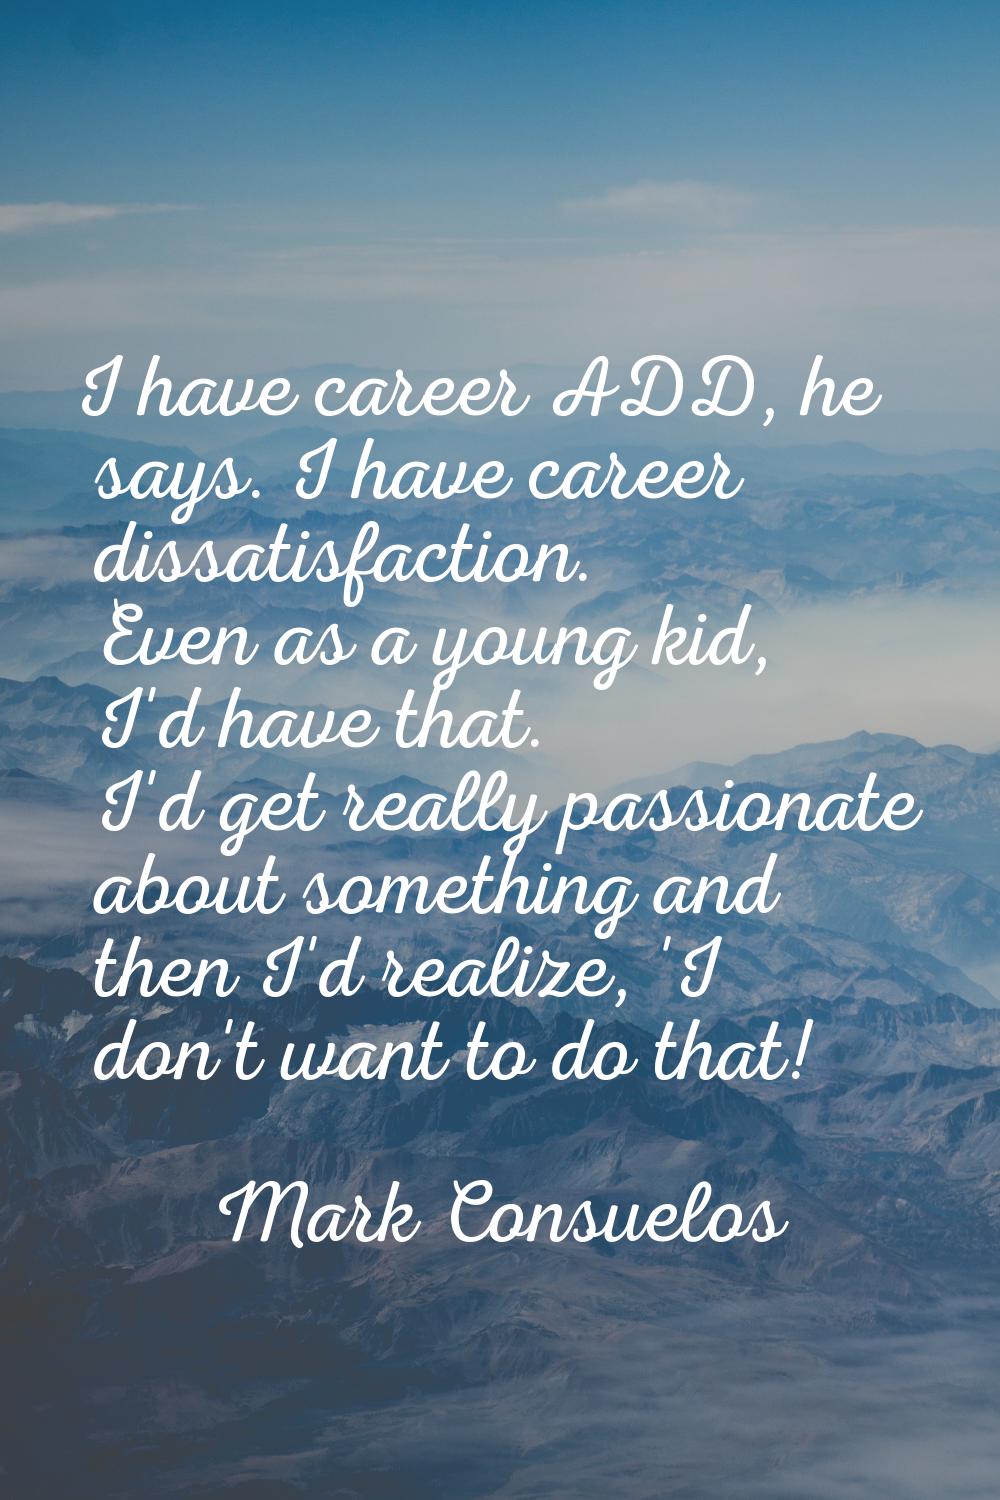 I have career ADD, he says. I have career dissatisfaction. Even as a young kid, I'd have that. I'd 